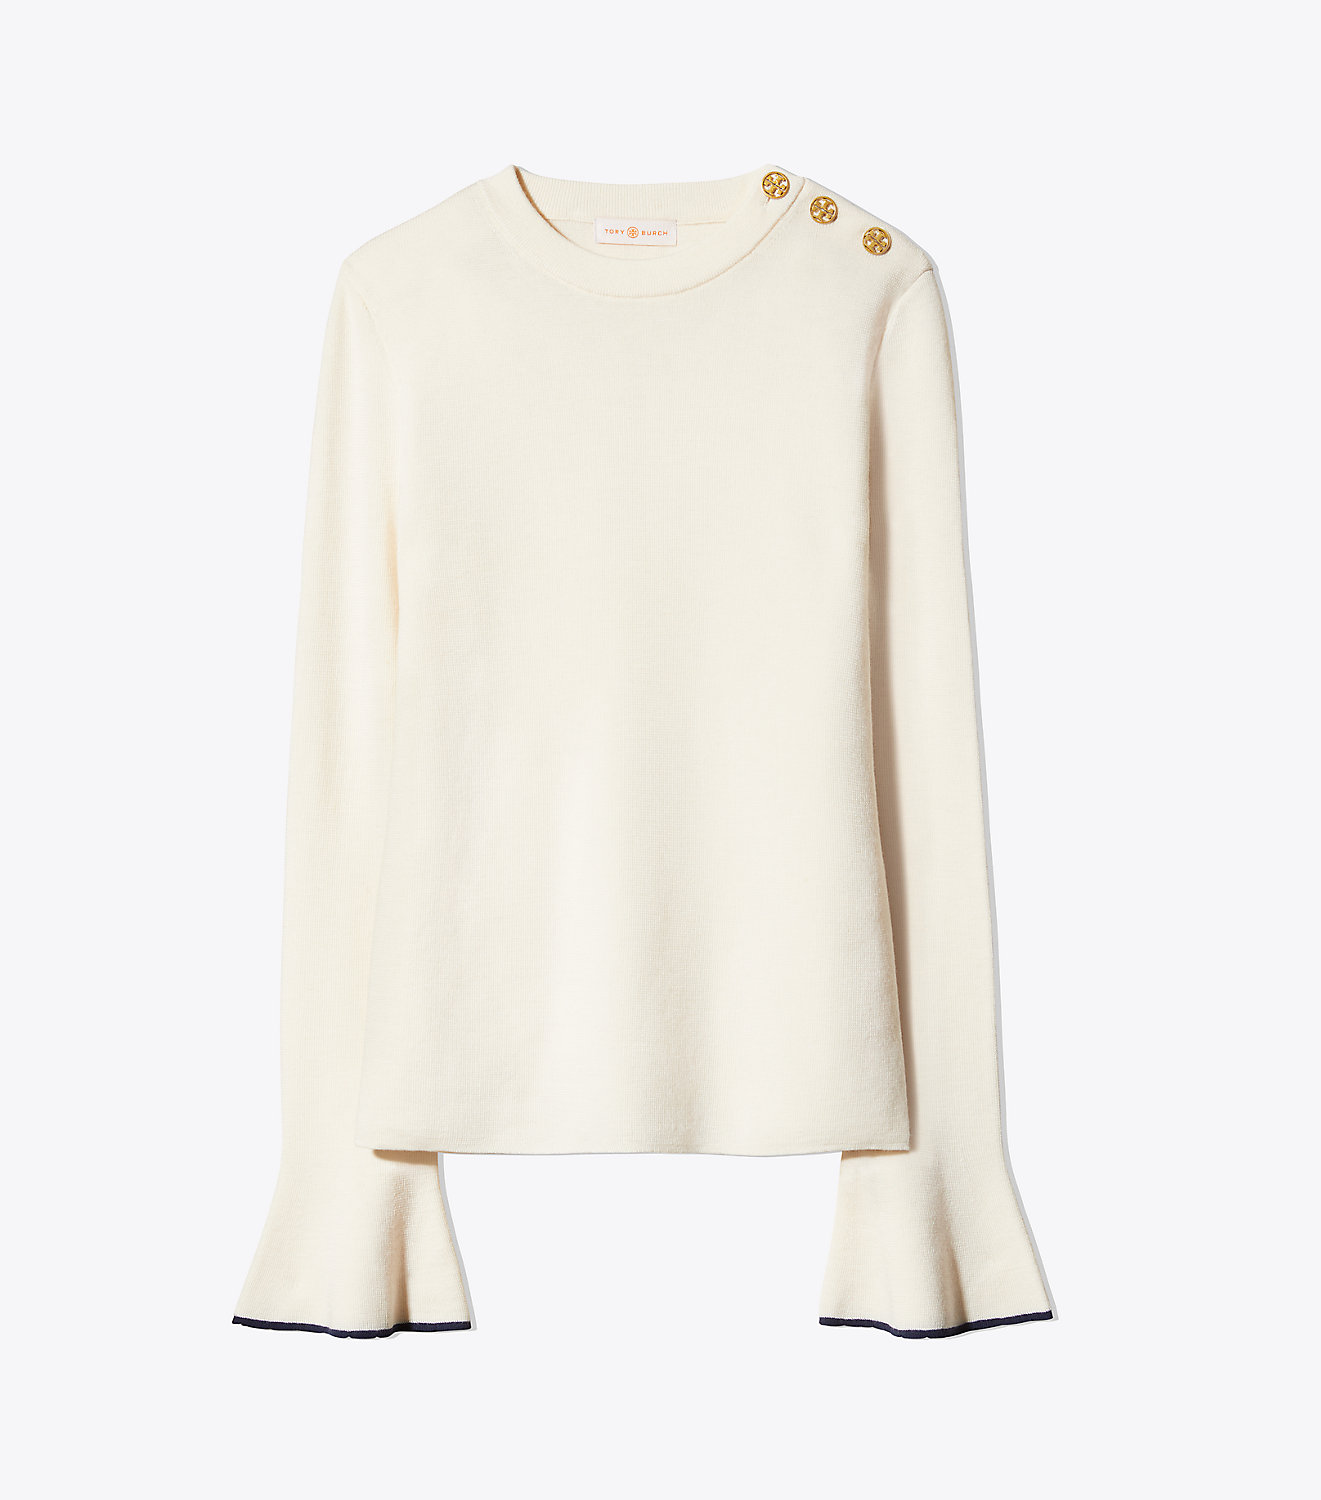 kimberly-sweater-tory-burch-feminine-knit -bell-sleeve-polished-gold-buttons-wool-katie-considers-blog-the-daily-hunt